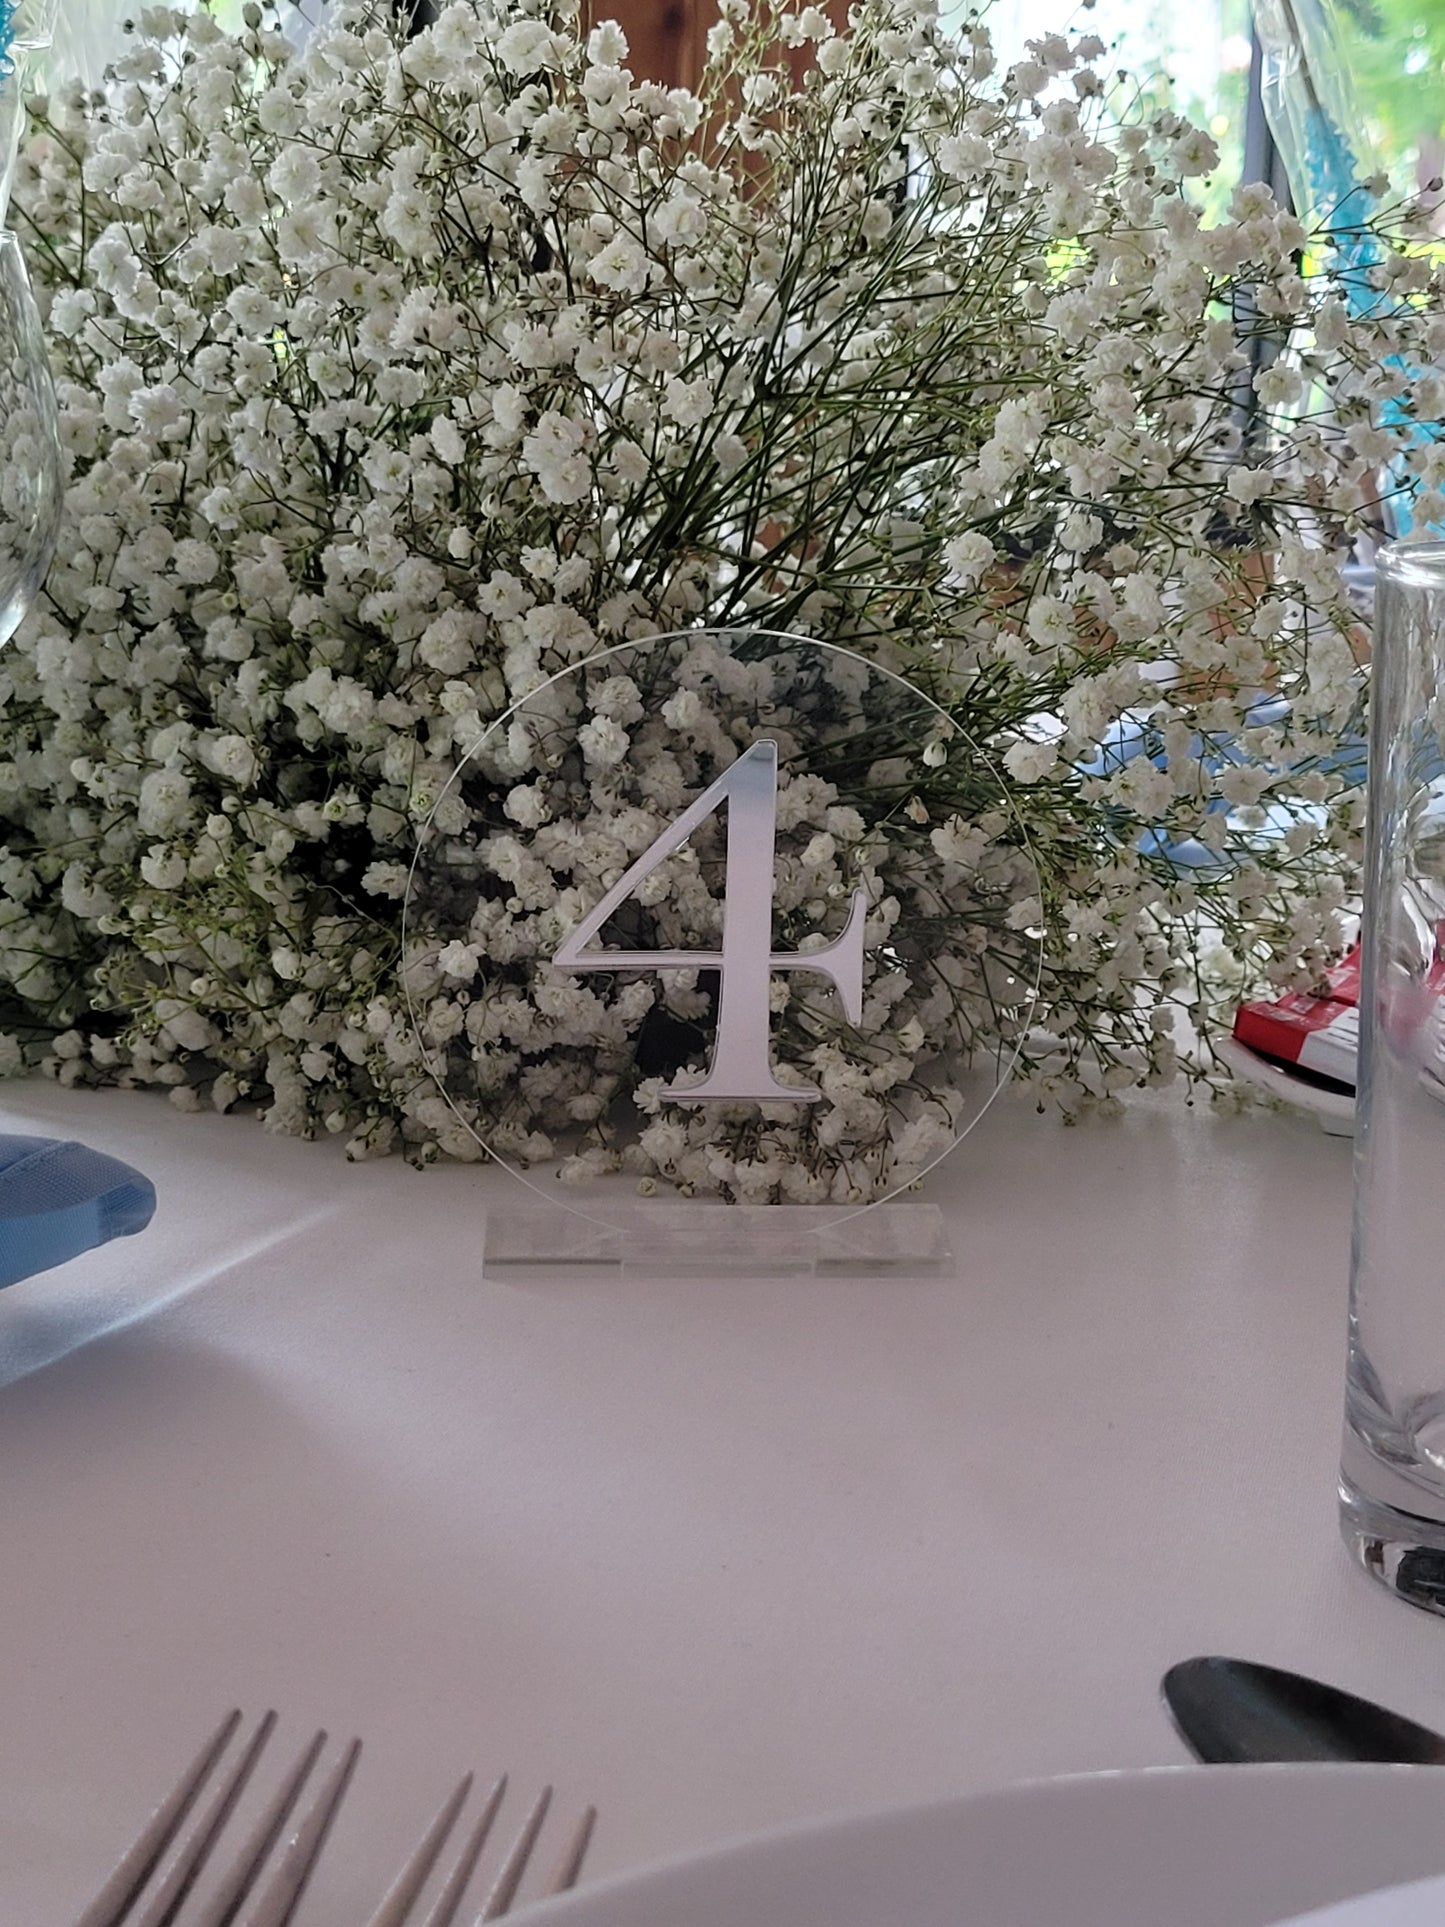 Acrylic Table Numbers